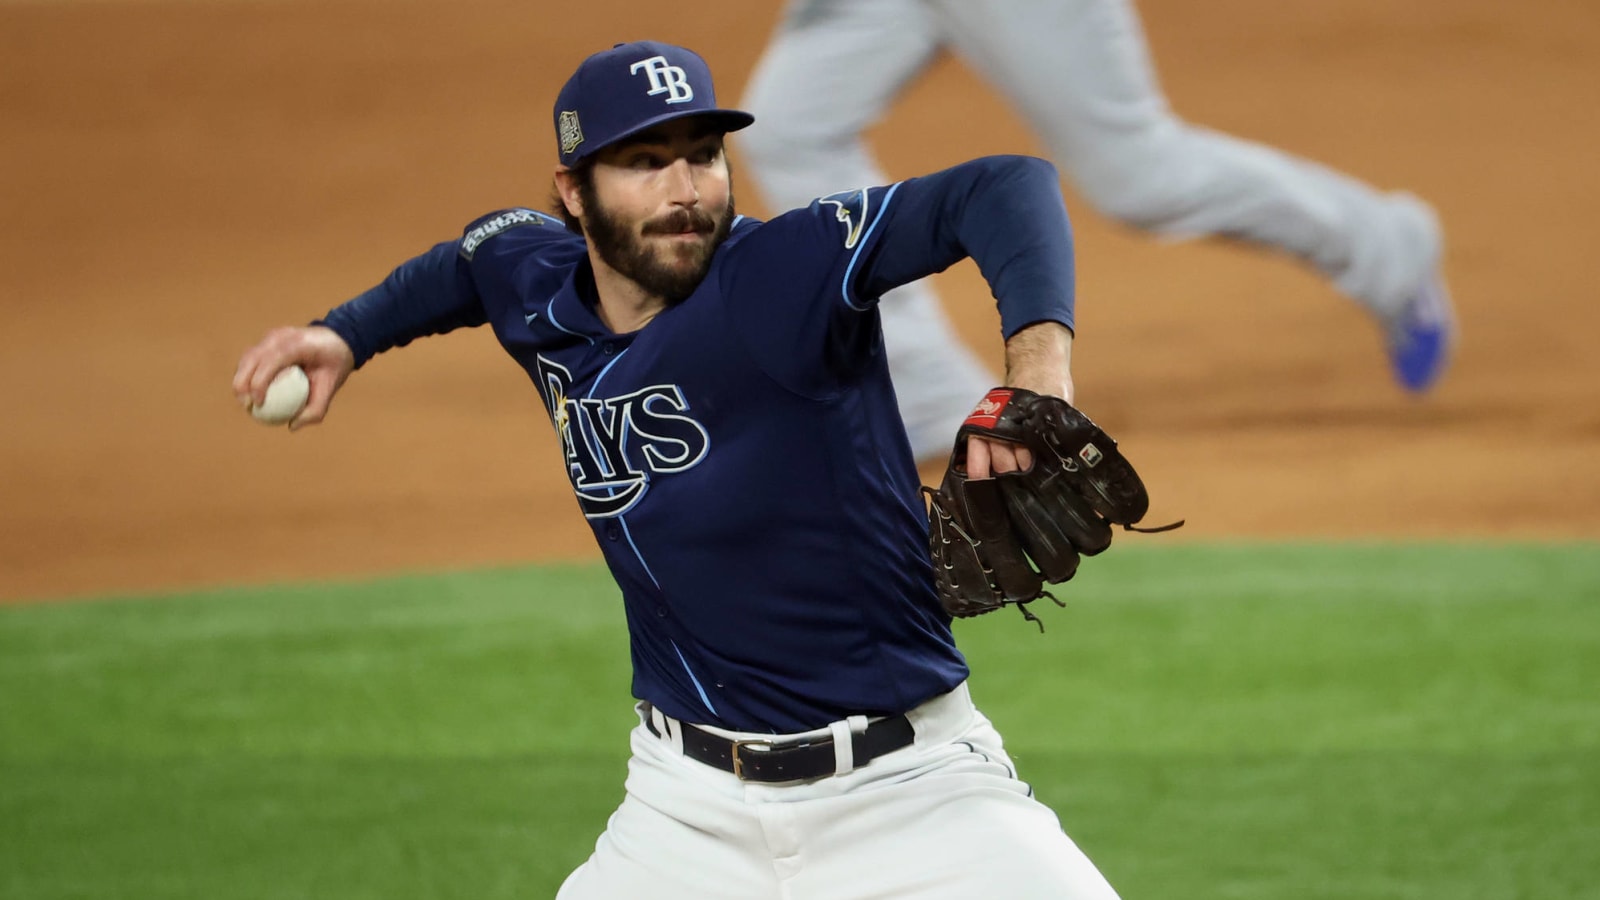 Marlins to acquire right-hander John Curtiss from Rays